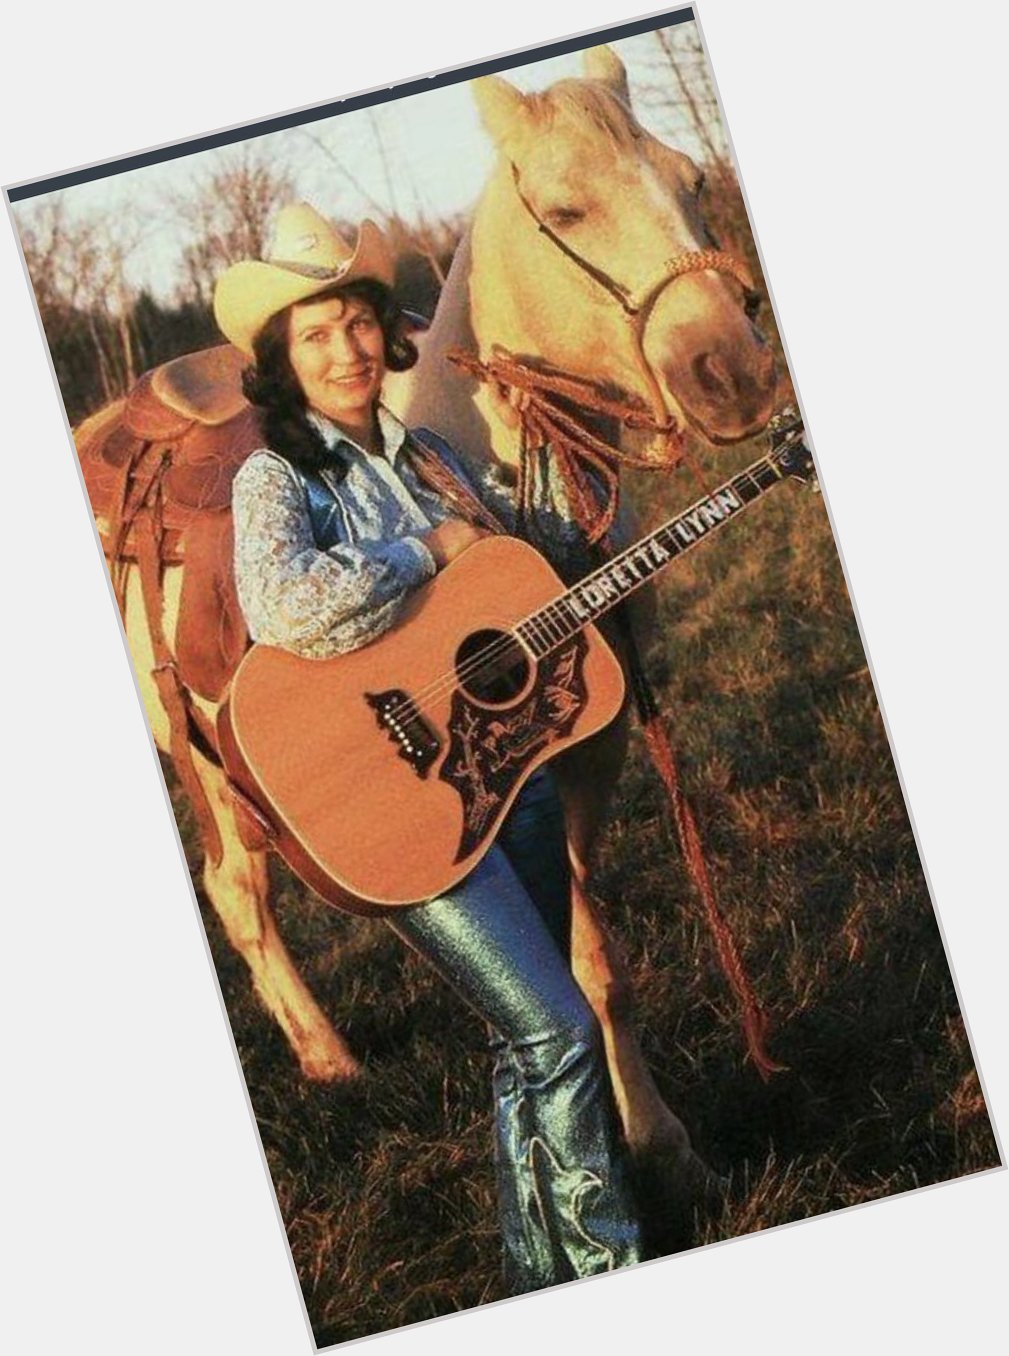 Happy Birthday to the Queen of country music and eastern Kentucky, Loretta Lynn. 